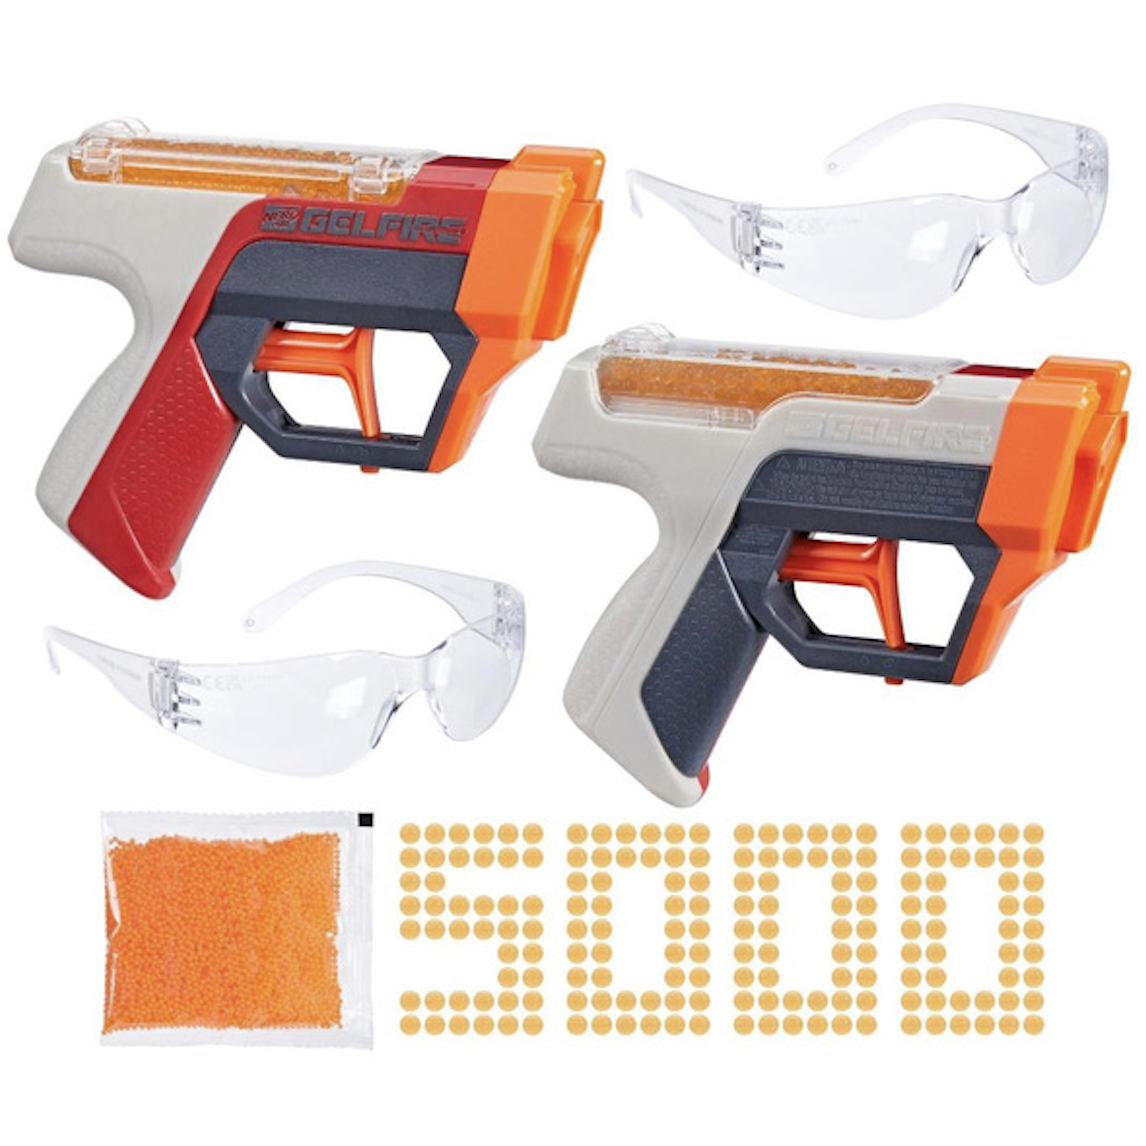 Screenshot of the brand of Nerf Pro Gelfire Dual Wield Blasters purchased by Seneca Moore ’27 and his friends.